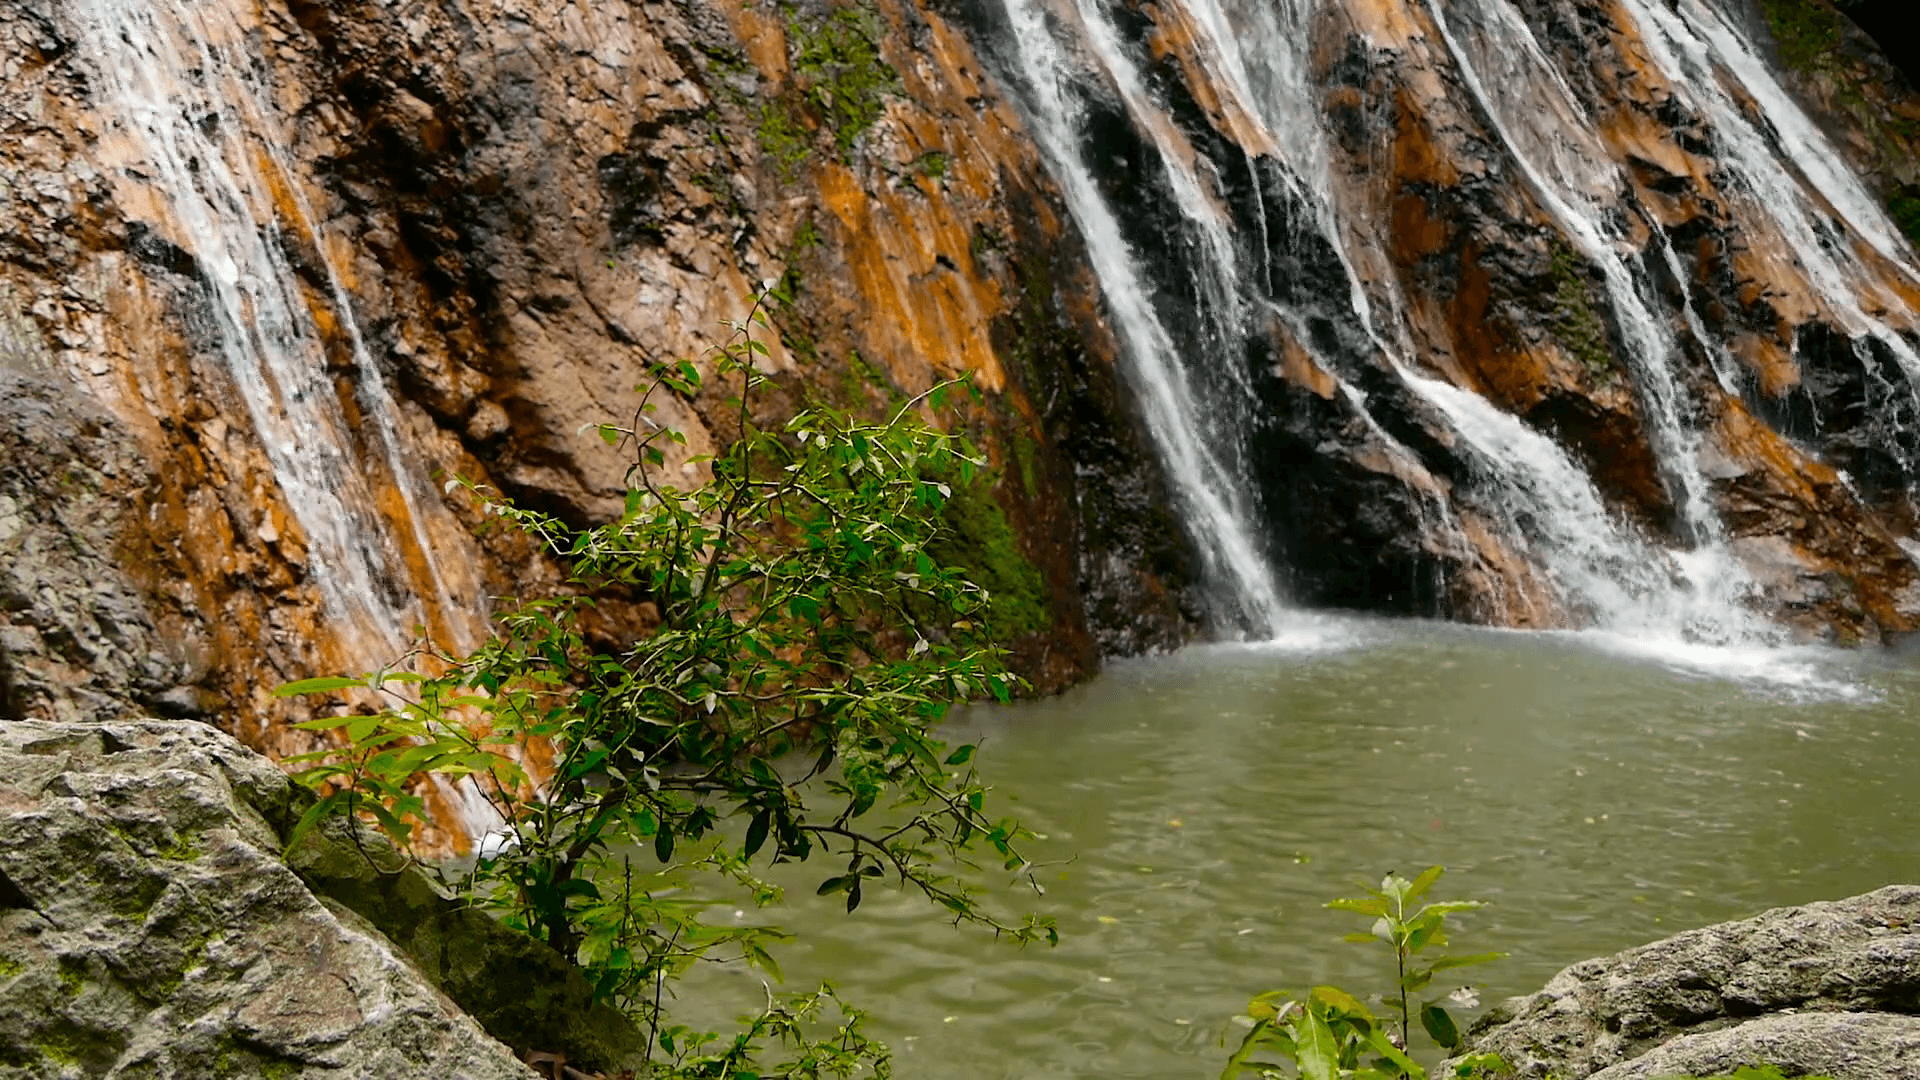 Jungle paradise landscape of tropical country. Waterfall cascade